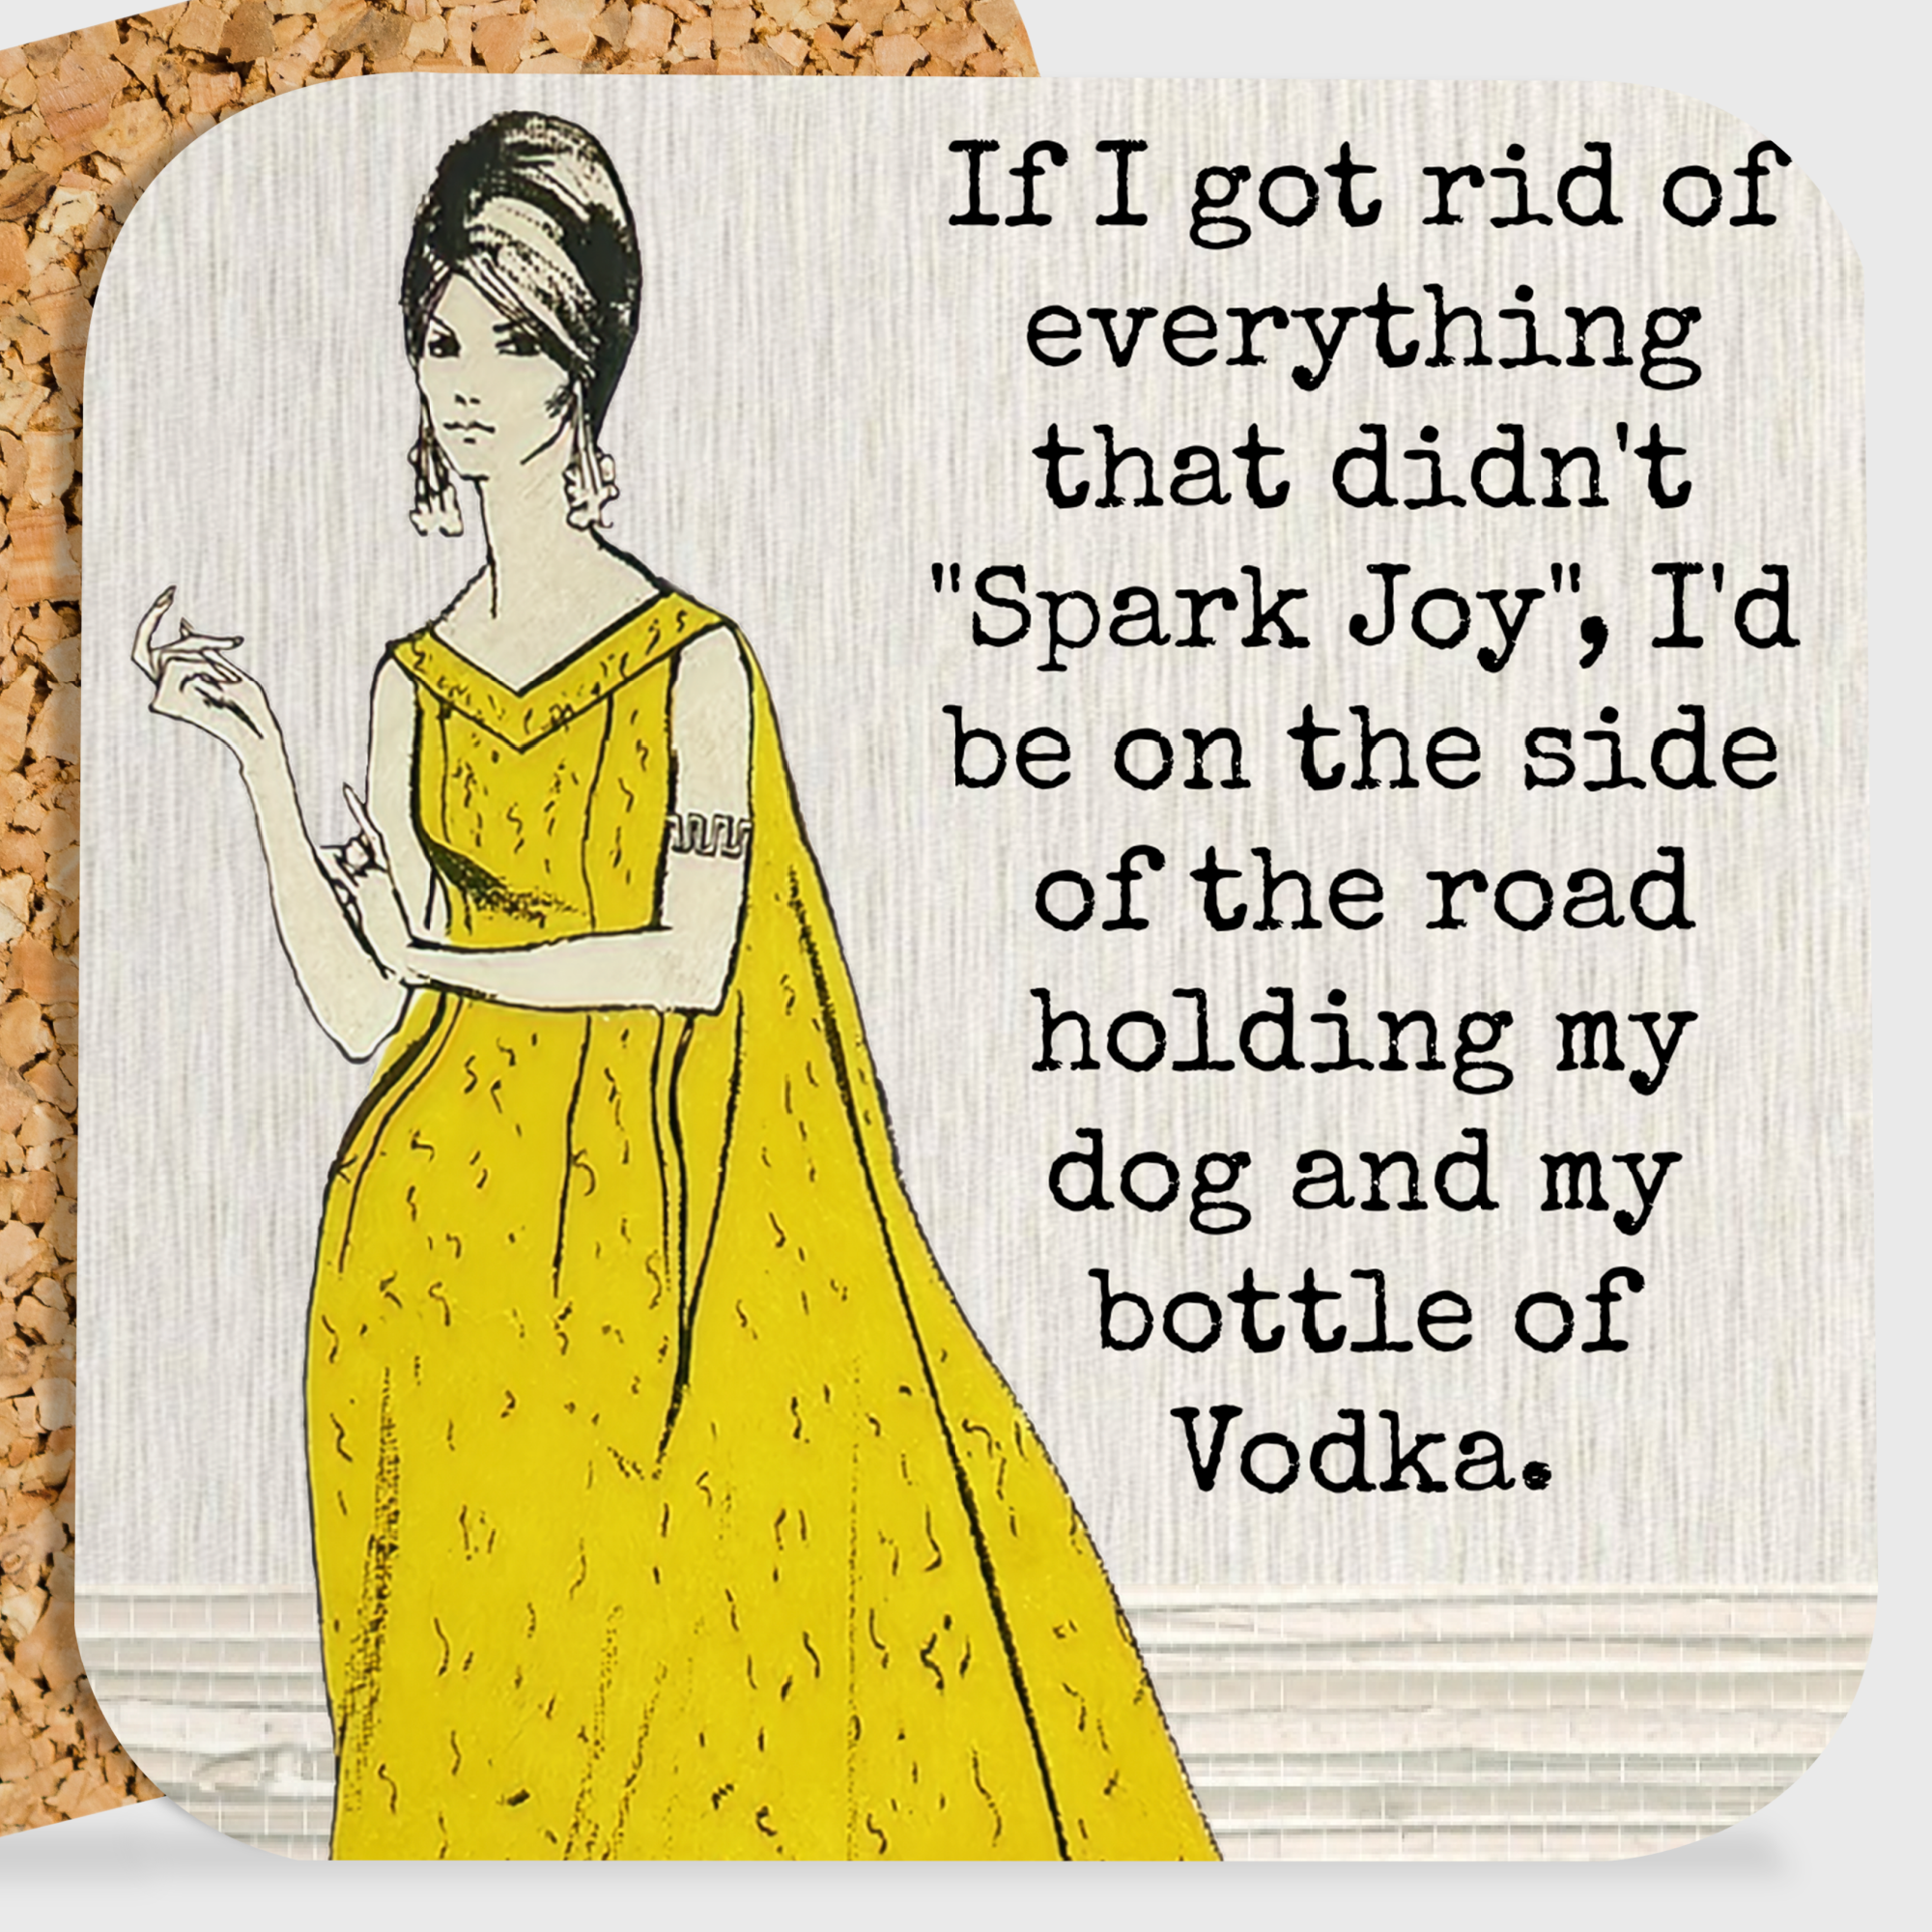 COASTER. If I Got Rid Of Everything That Didn't "Spark Joy".